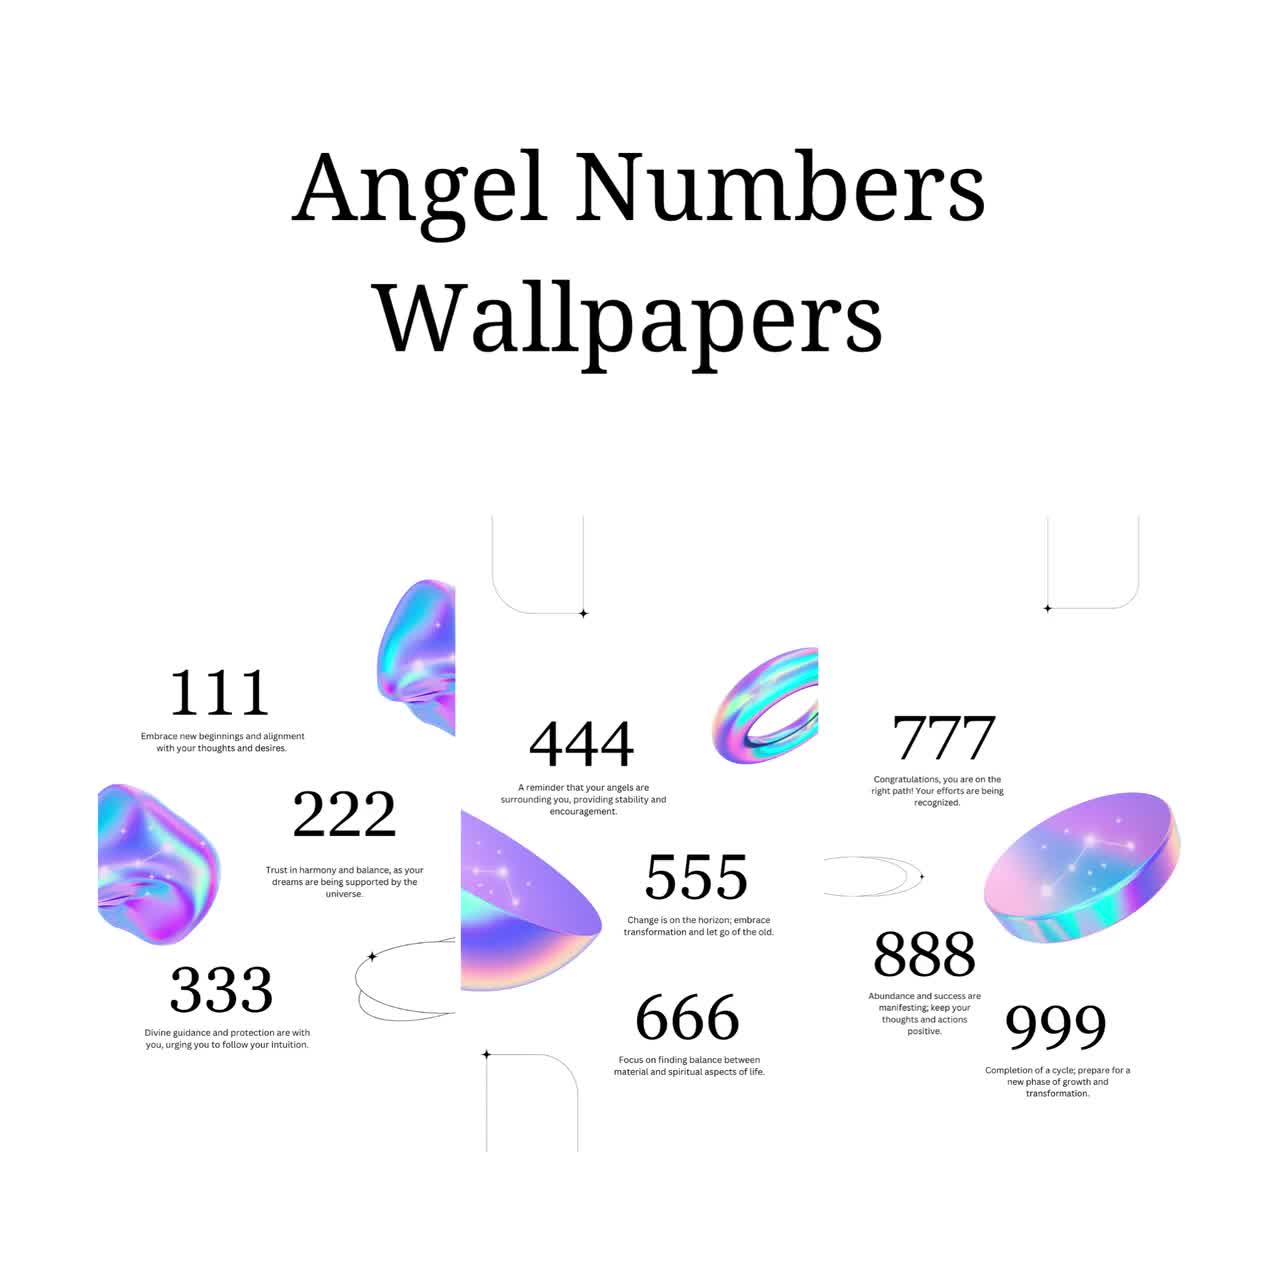 100+] Guest 666 Wallpapers